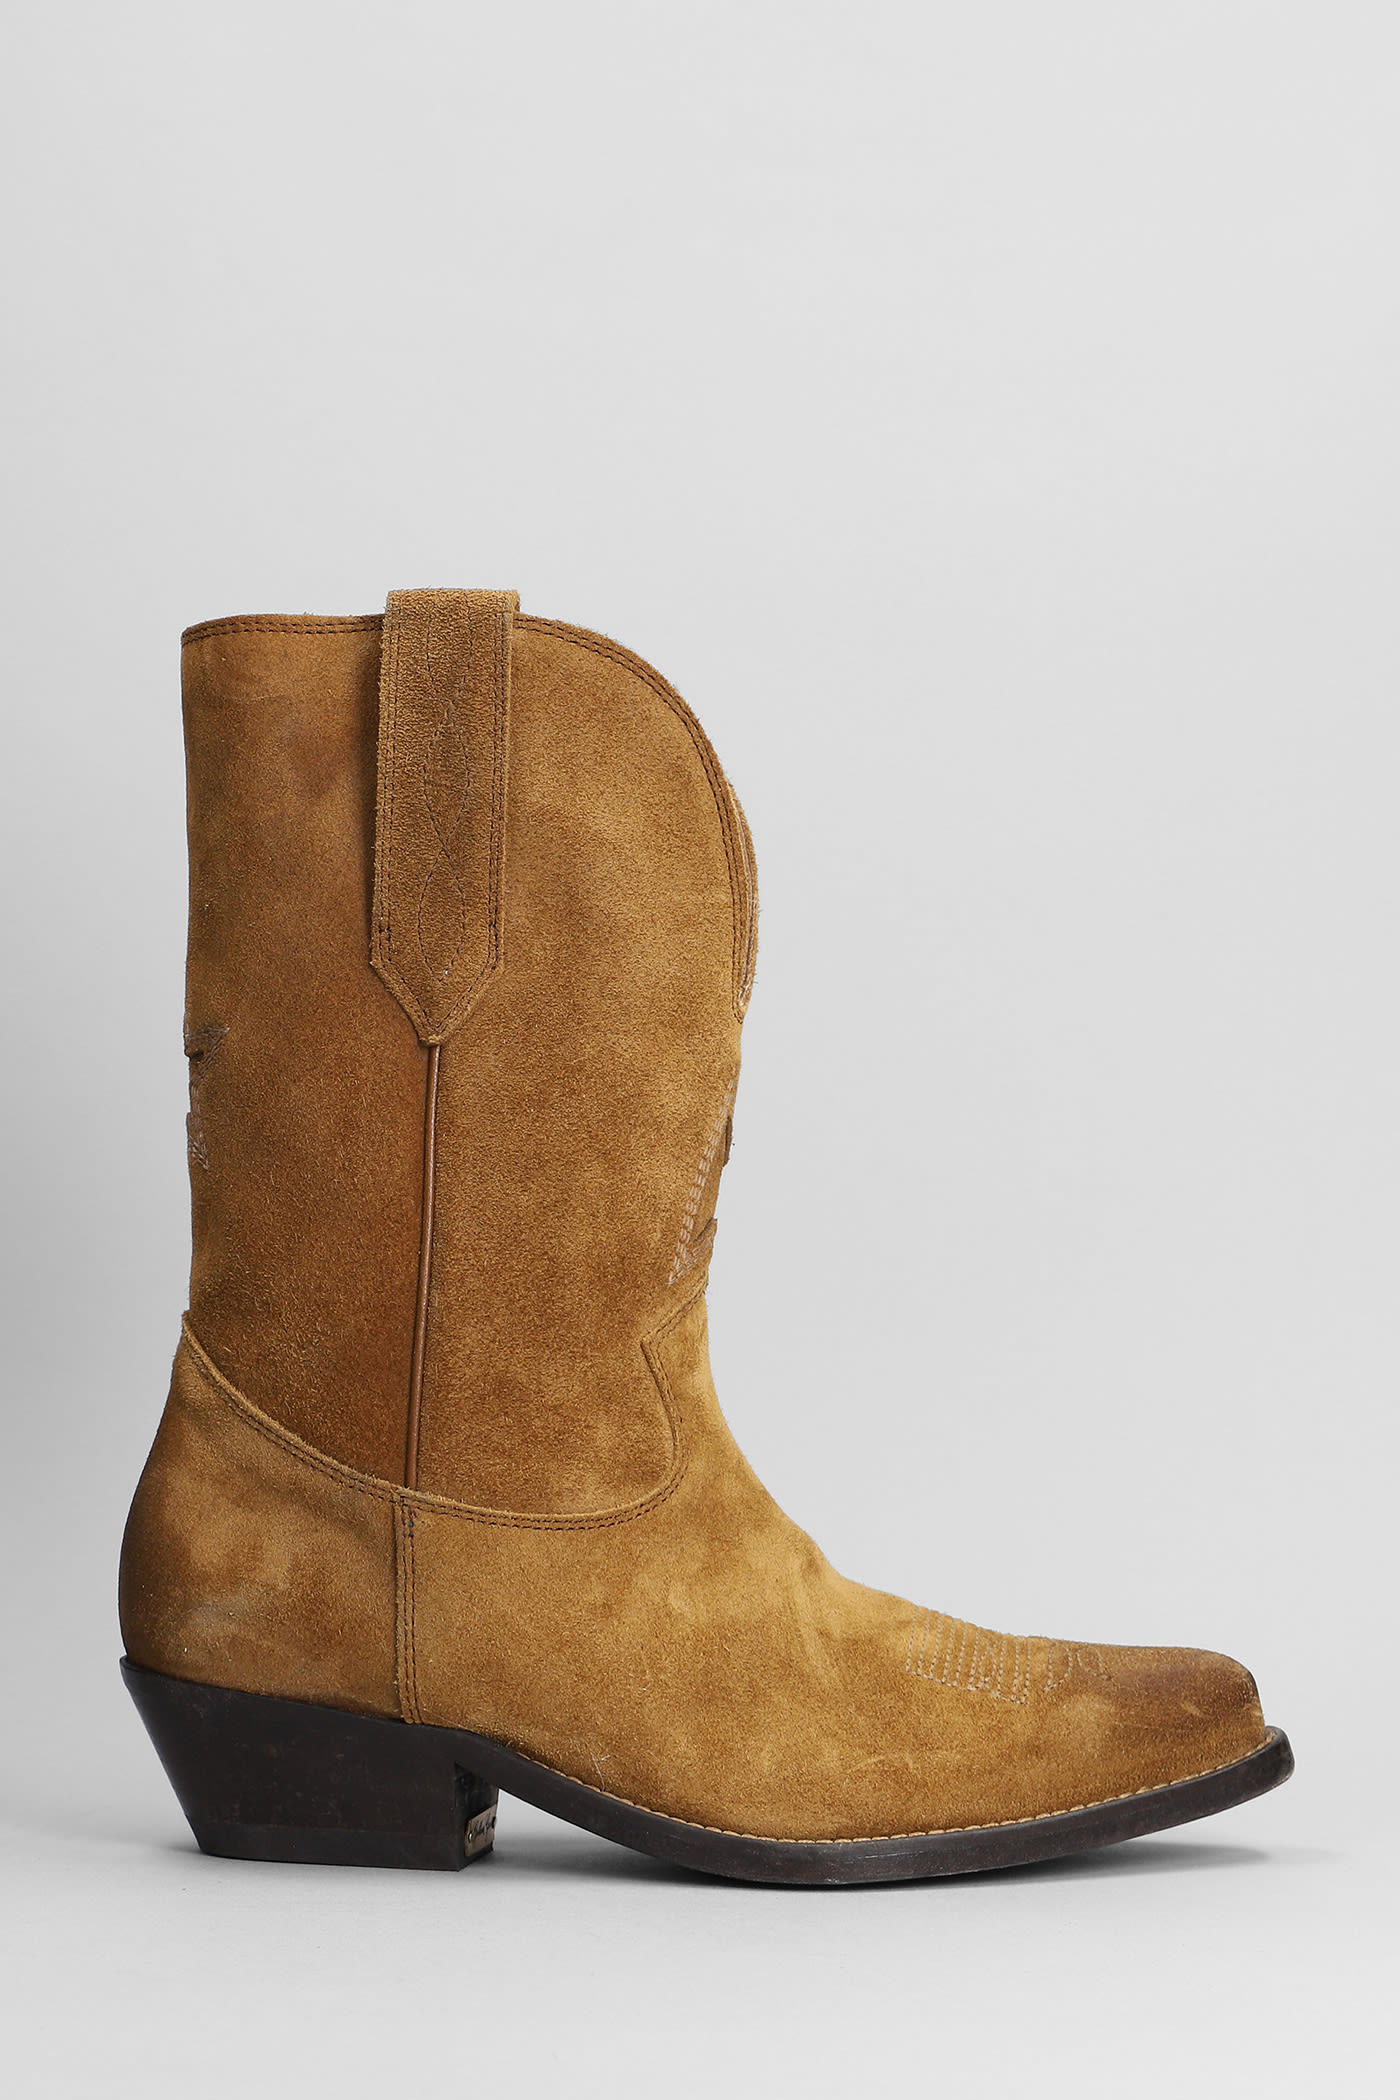 GOLDEN GOOSE WISH STAR TEXAN BOOTS IN LEATHER COLOR SUEDE